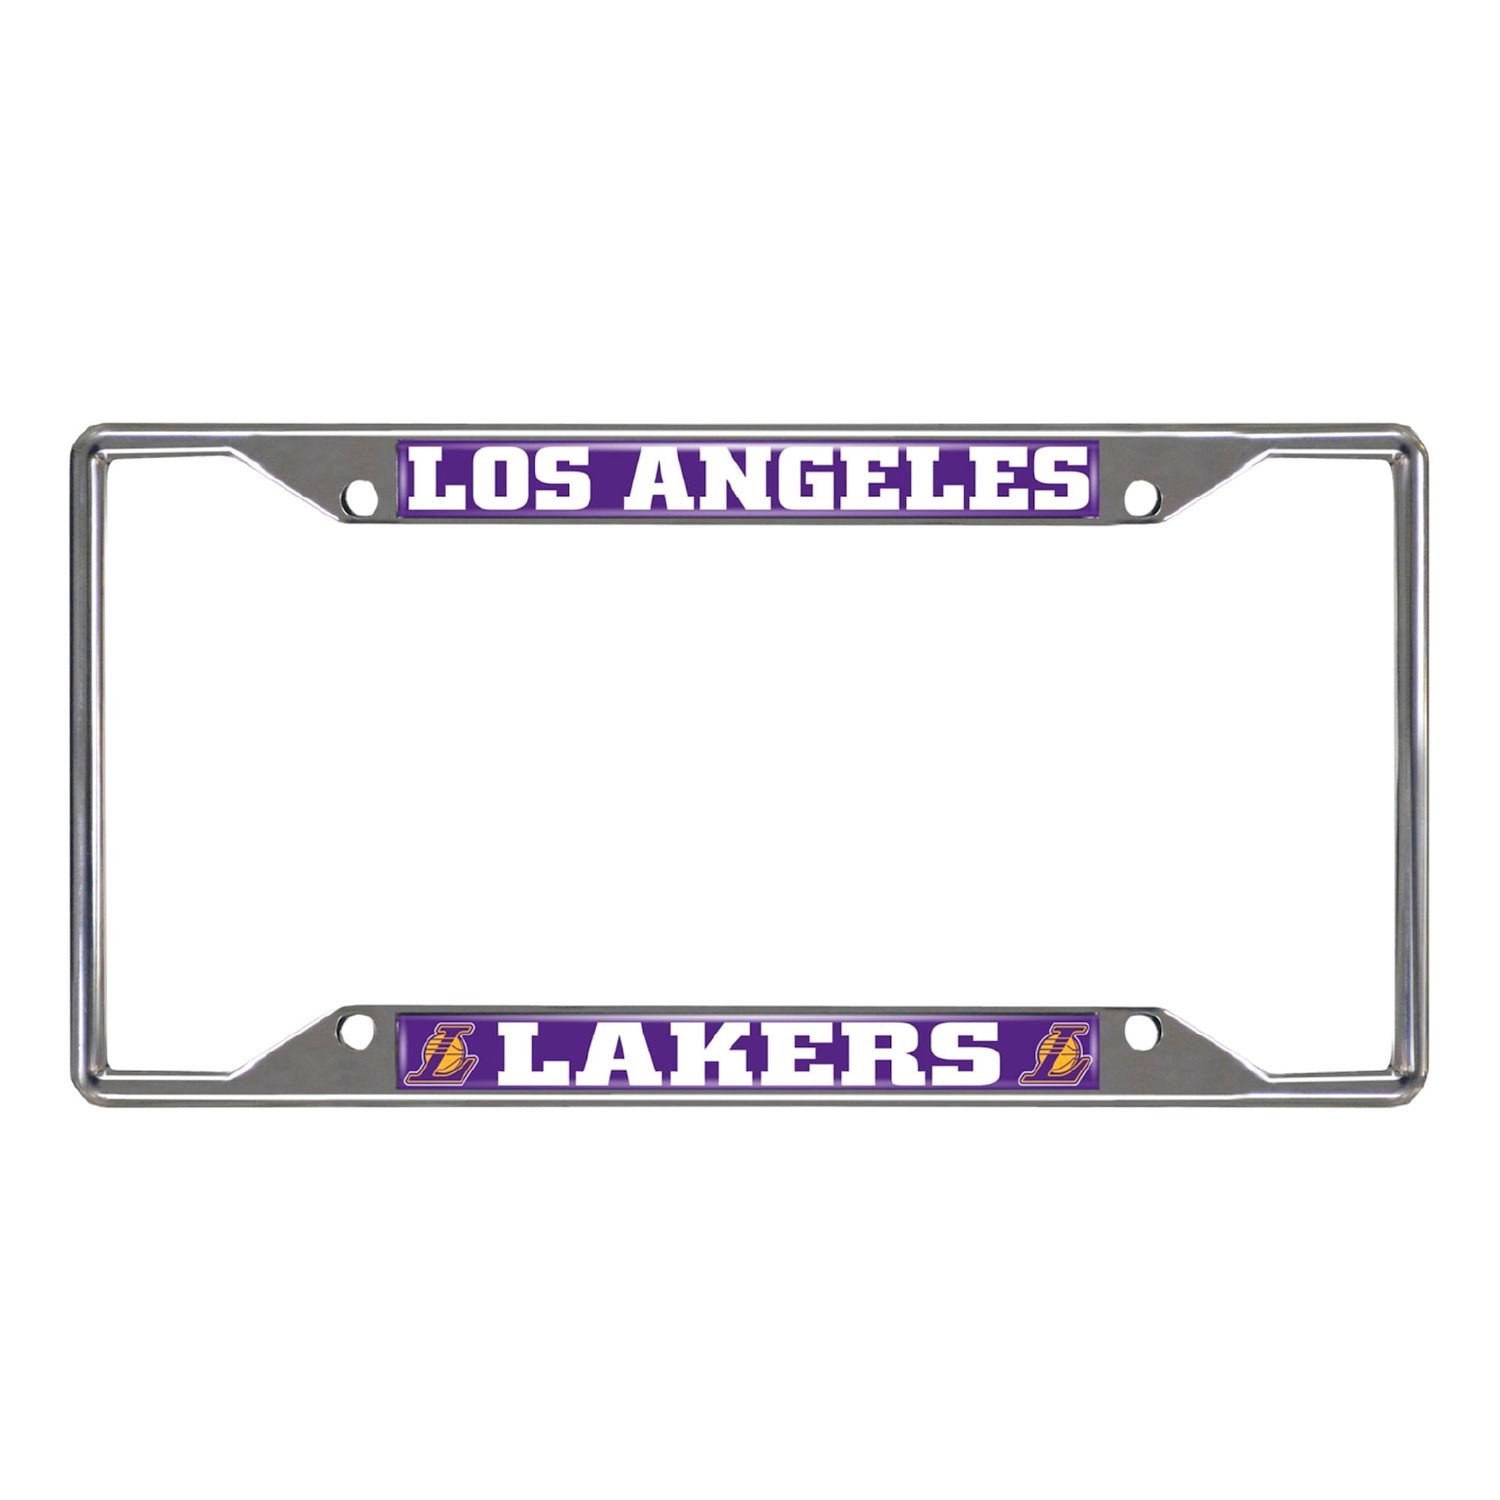 14796 Chrome-Metal License Plate Frame, 6.25 in. x 12.25 in., Los Angeles Lakers [Purple Logo]